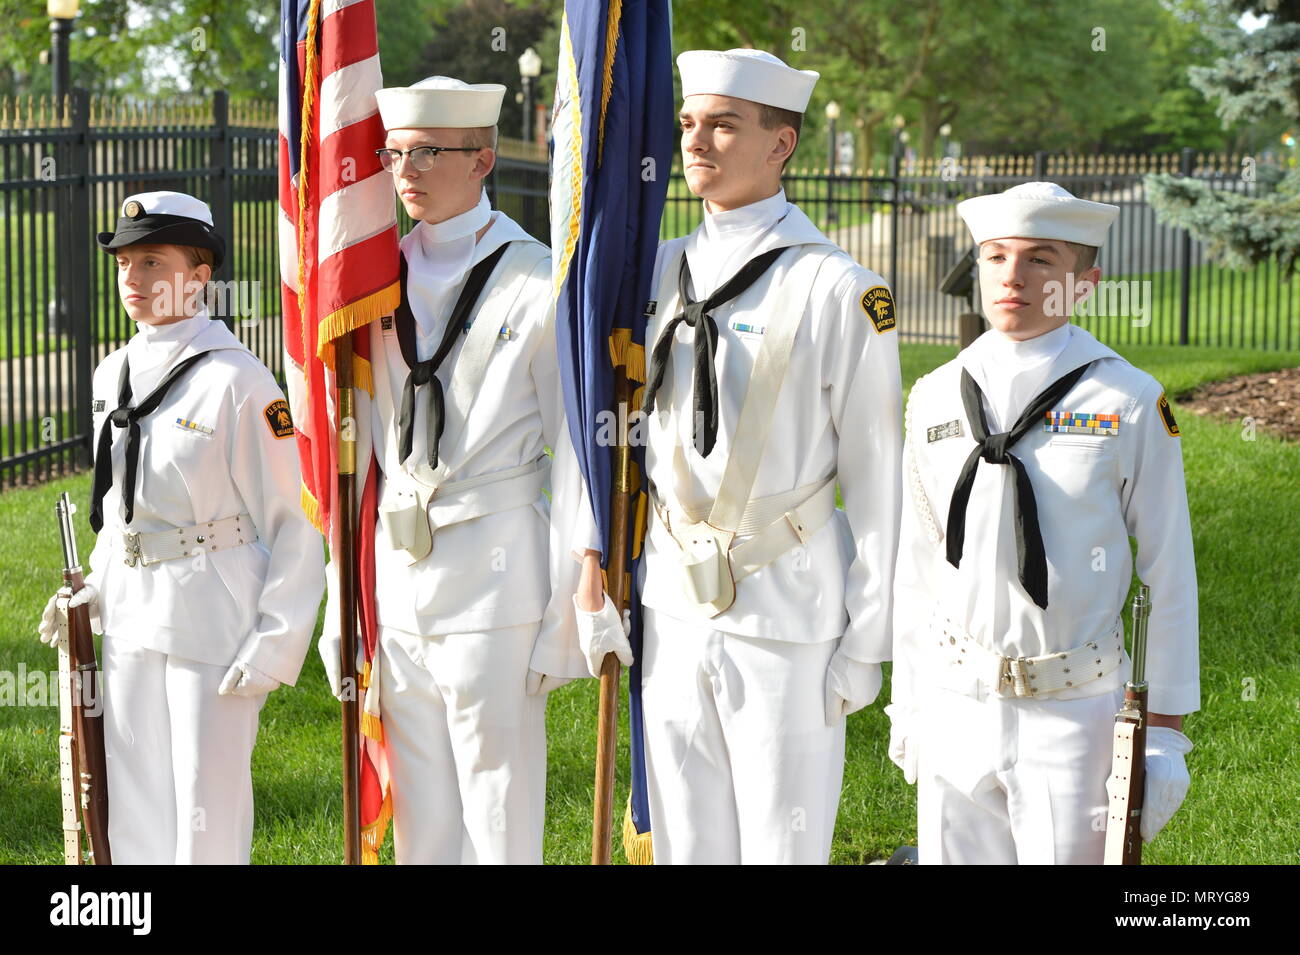 GRAND RAPIDS, Mich. (Jul 14, 2017) - Cadet Seaman Apprentice Alyssia Wealtherly, Battle Creak, Mich., Cadet Seaman Apprentice Austin Merritt, Marshall, Mich., Cadet Seaman Apprentice Martin Dams, Plainwell, Mich., and Cadet Petty Officer 2nd Class, Mich., from the U.S. Naval Sea Cadet Corps, Windward Division present honors at the annual presidential wreath laying ceremony. This day would be the 104th birthday of President Gerald R. Ford. The ceremony was held today at Ford's gravesite at the presidential museum. (U.S. Navy photo by Mass Communication Specialist 1st Class Jenny L. Lasko) Stock Photo